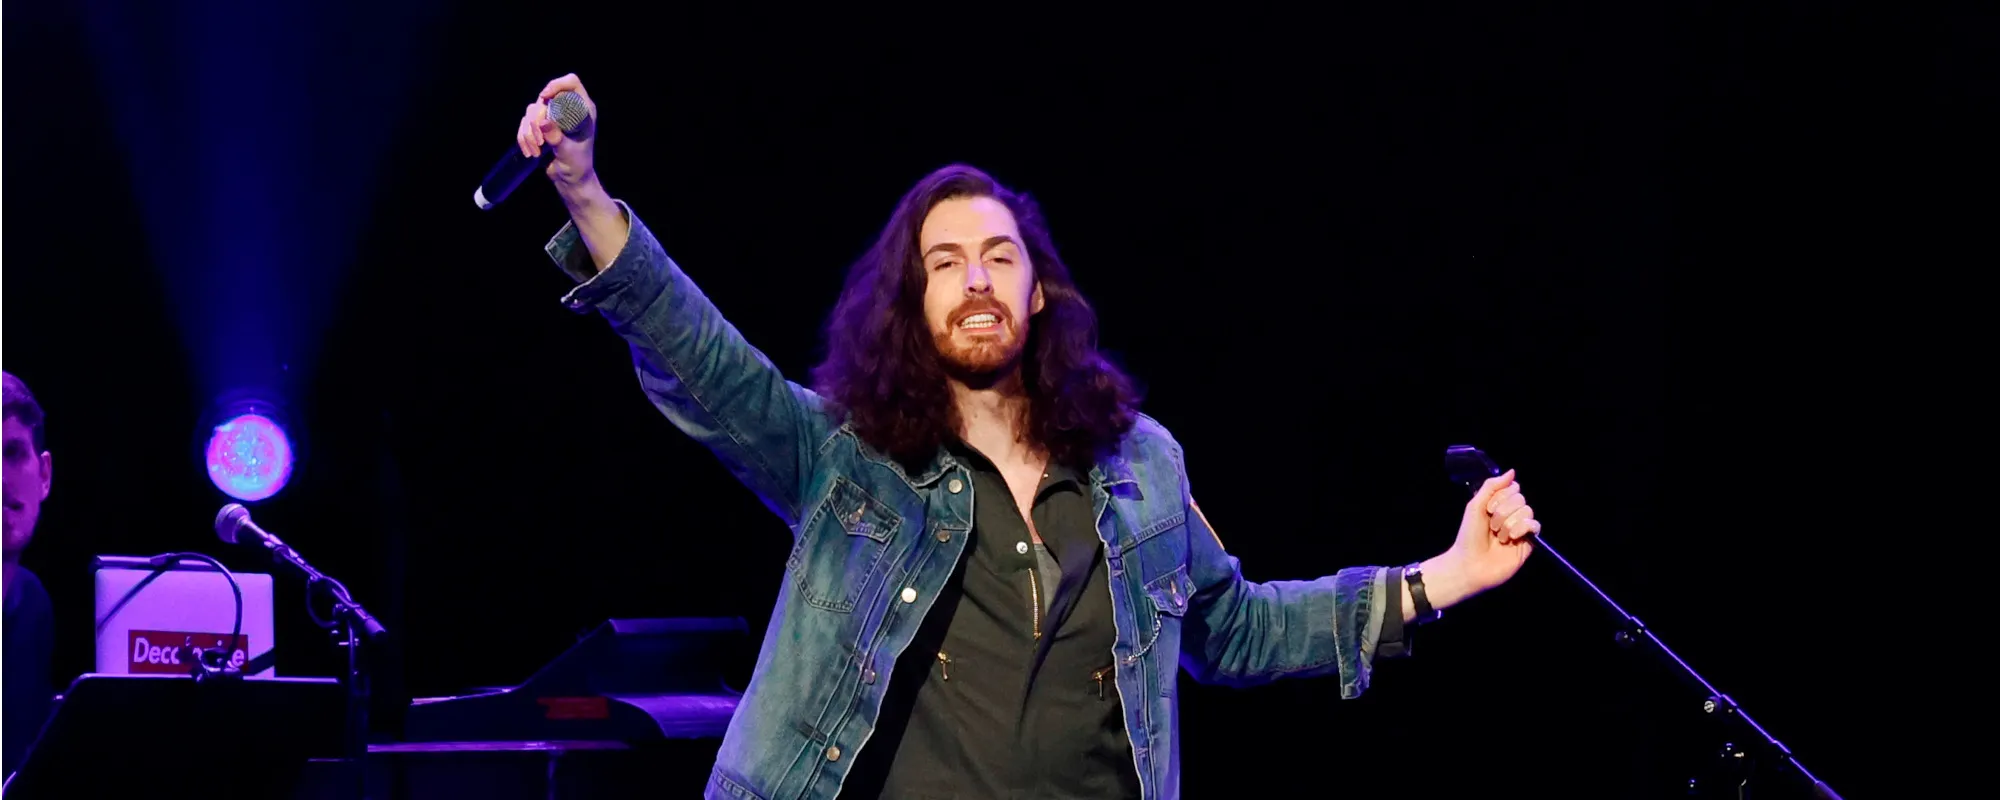 The Top 5 Hozier Songs